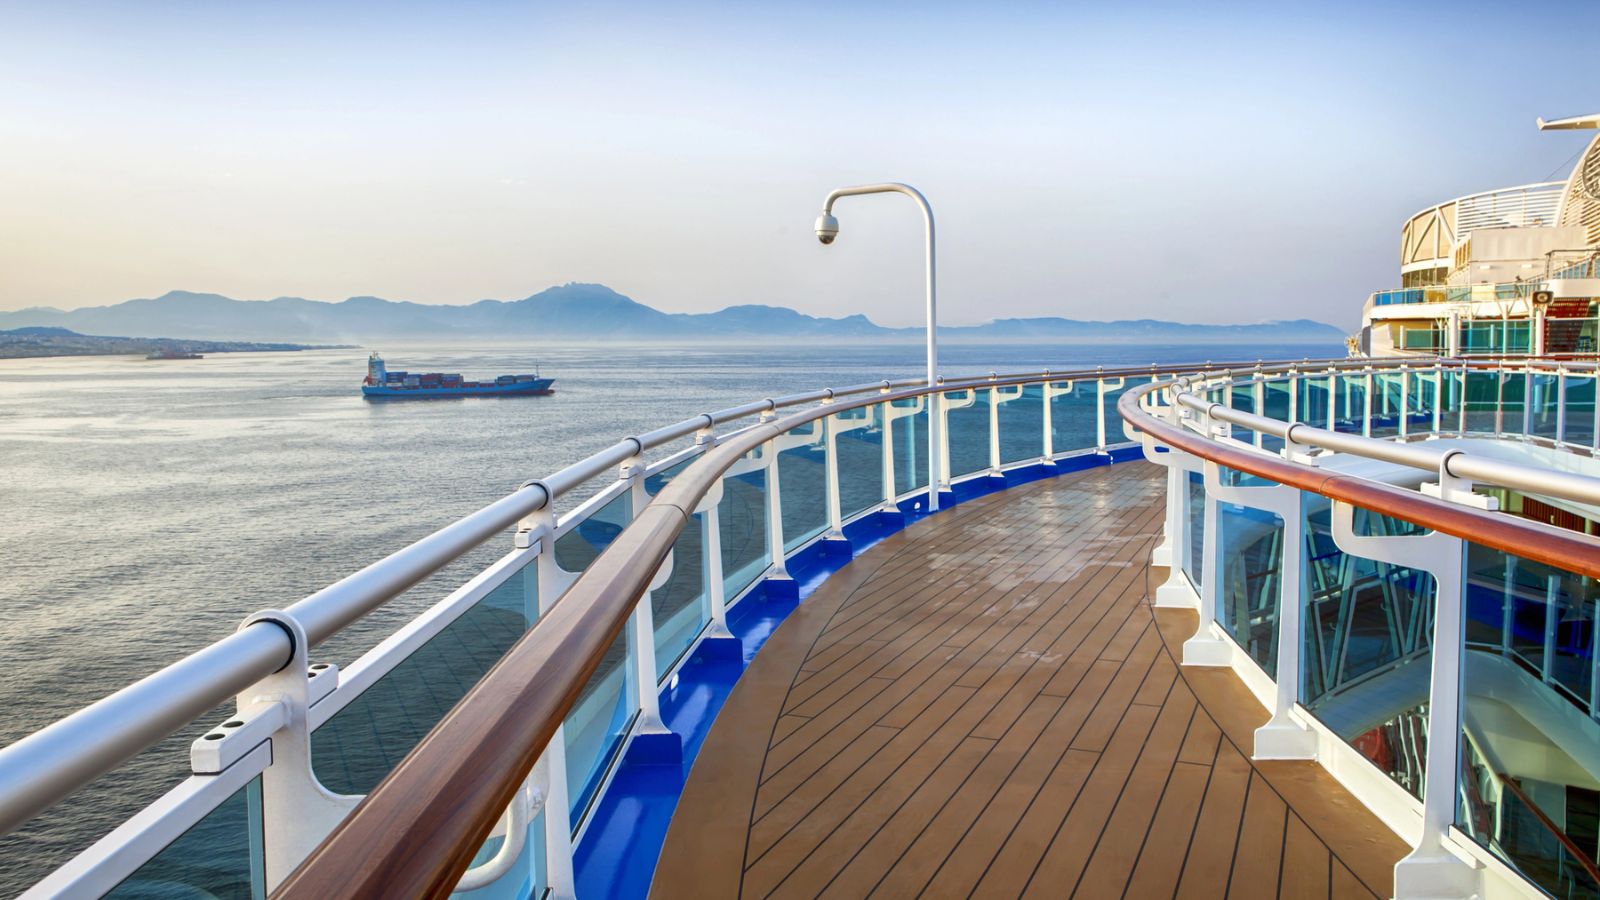 <p>This rule applies to any type of travel, but it’s particularly true for cruises. Ticket prices skyrocket in peak season. So, if you’re looking for a bargain, don’t go when school’s out.</p><p>If you have the luxury of waiting until shoulder season, you can enjoy the same trip for a fraction of the cost and still experience enviable weather.</p>